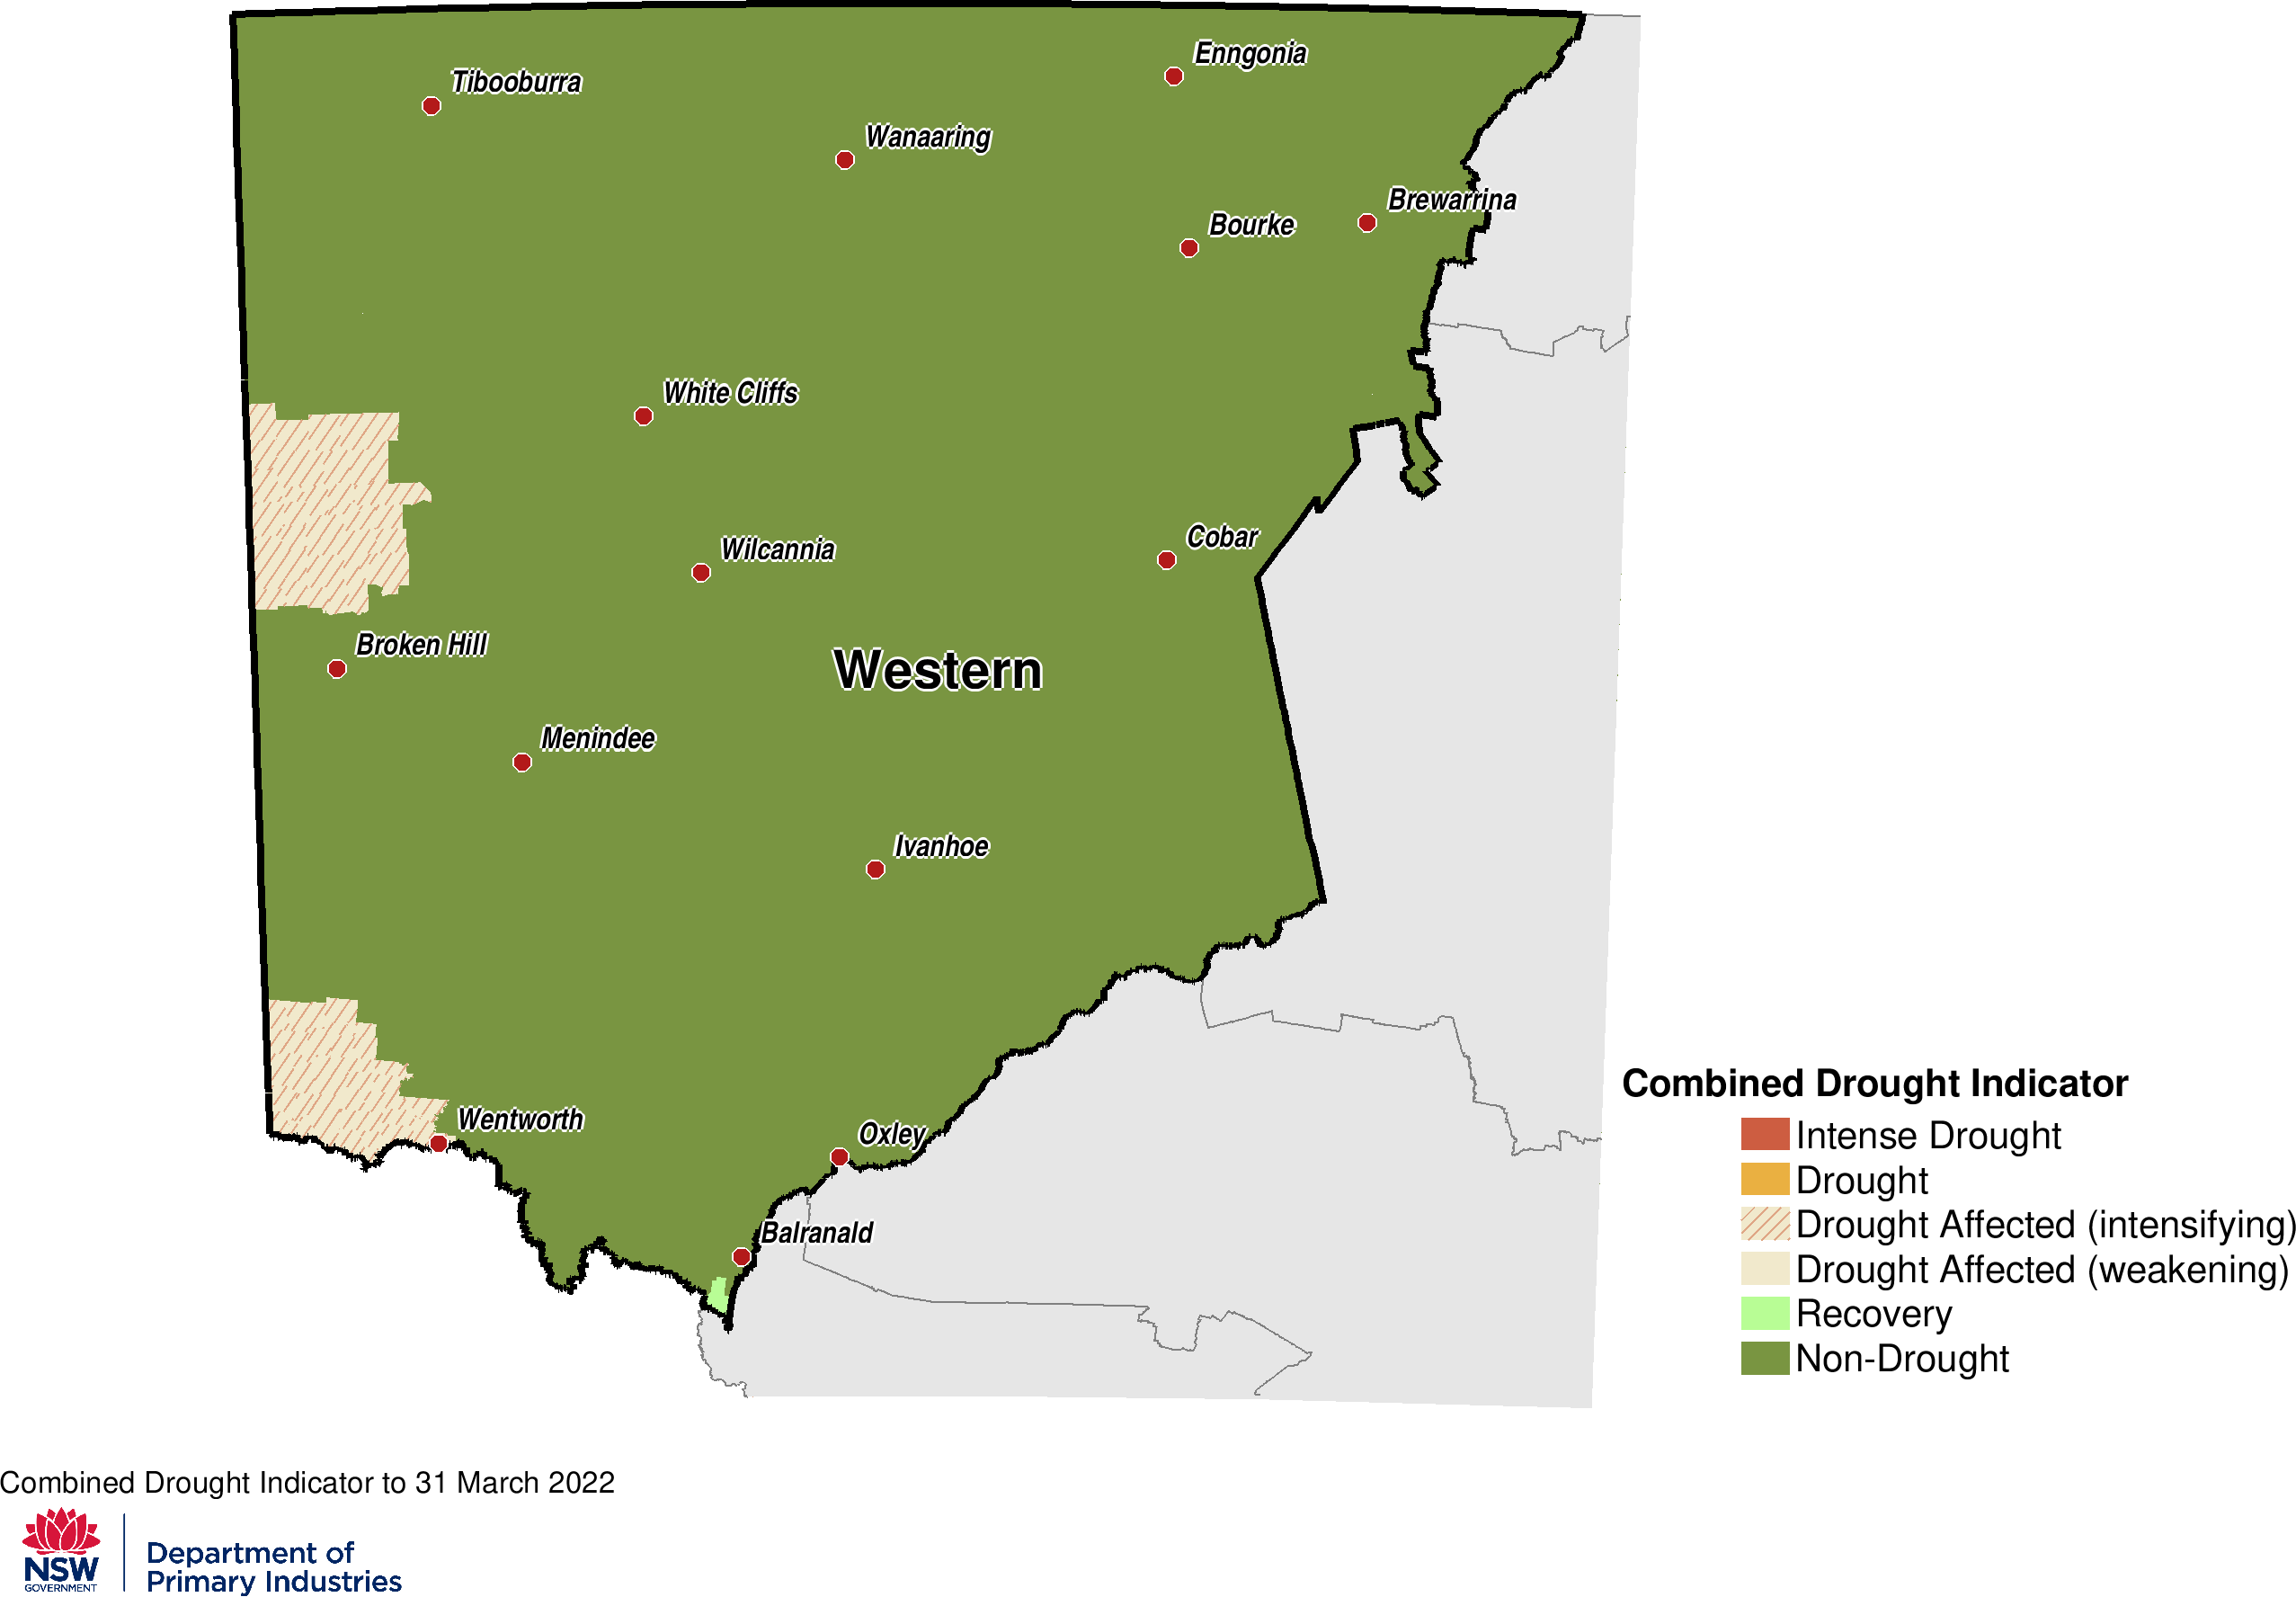 Figure 14. Combined Drought Indicator for the Western LLS region 